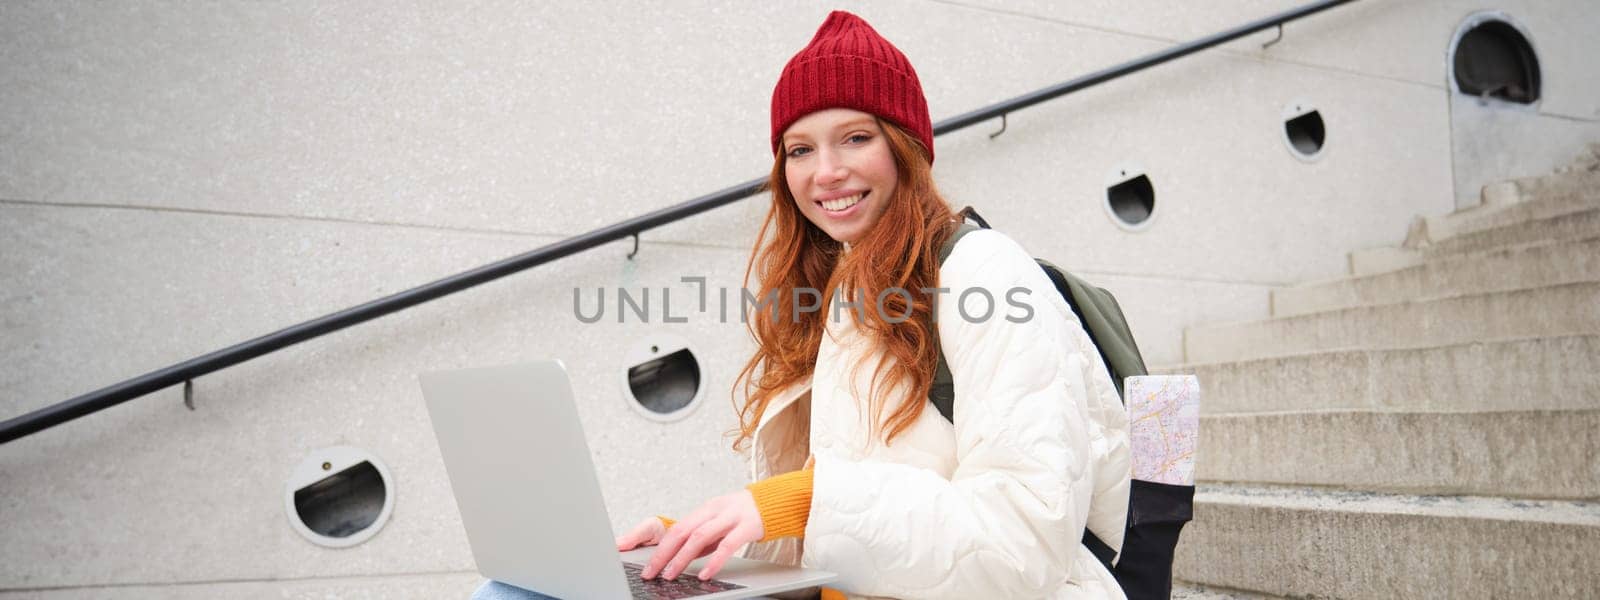 Portrait of young girl traveller, sitting with backpack and map of city, working on laptop, connecting to public wifi and sitting on stairs outdoors, using internet to book hotel room.